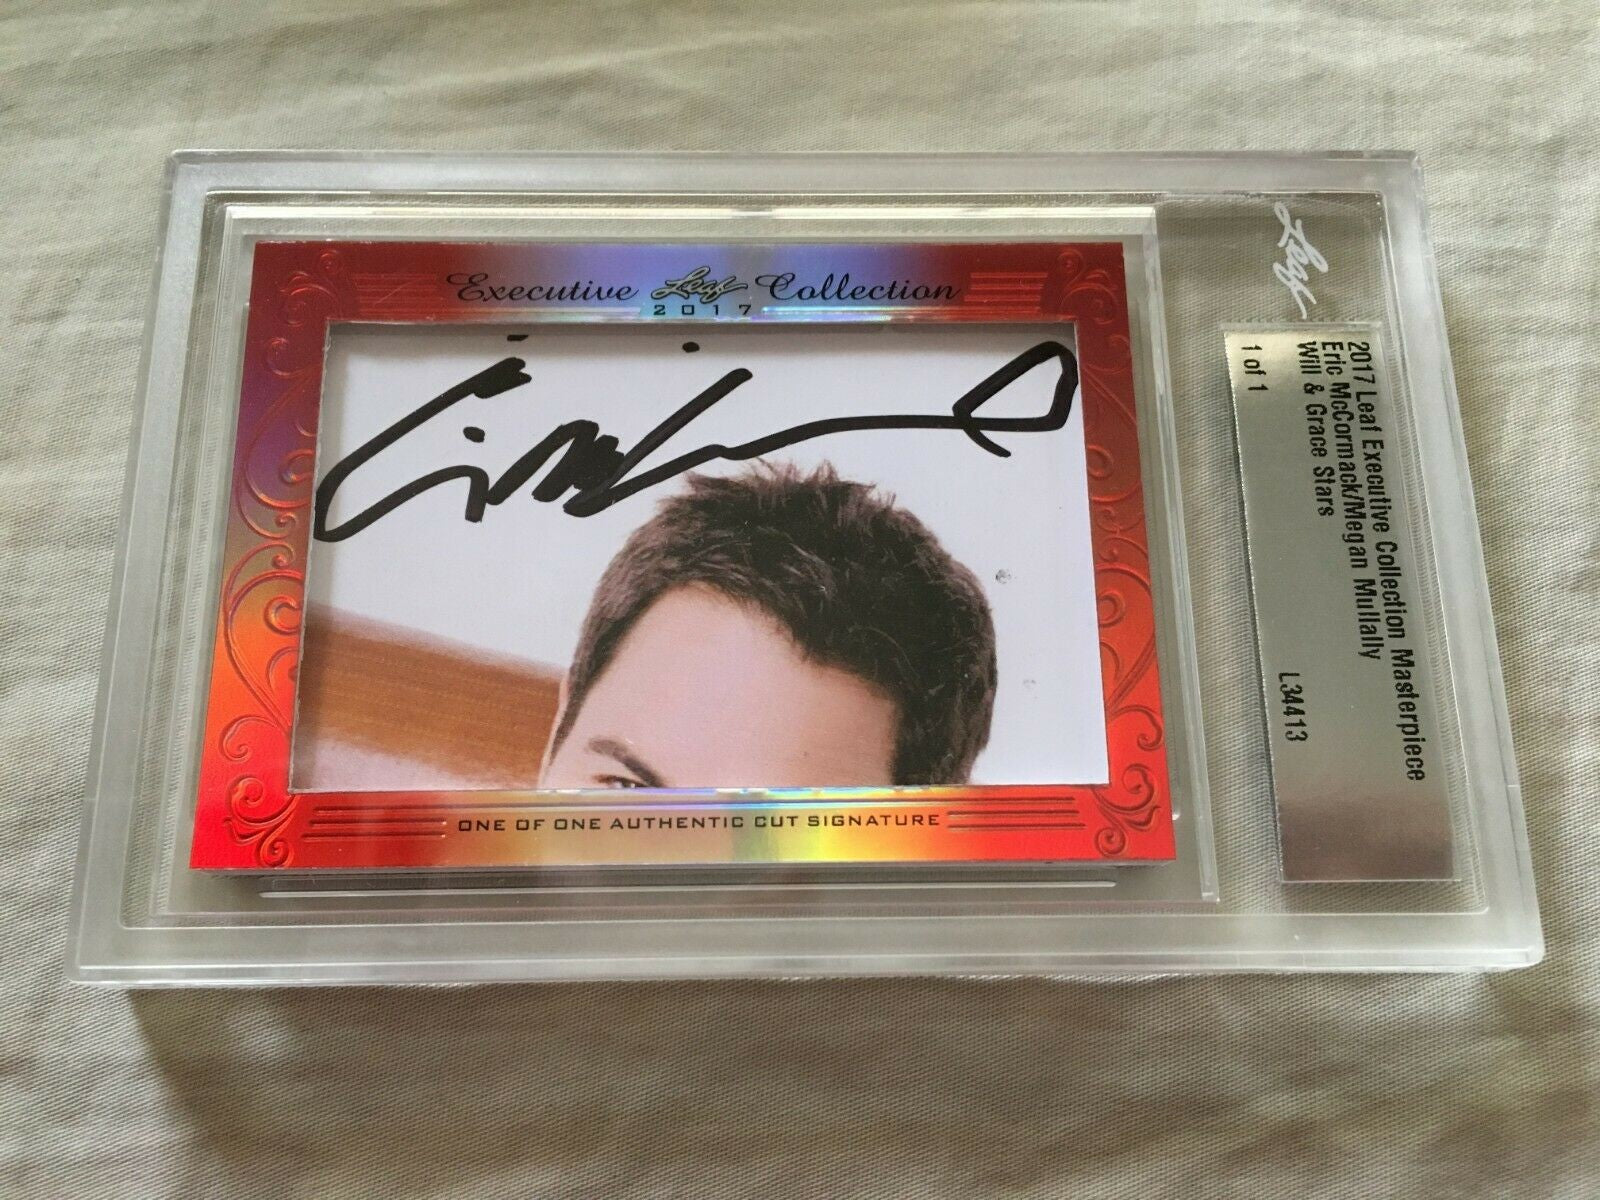 Eric McCormack and Megan Mullally 2017 Leaf Cut Signature certified autograph card 1/1 JSA Will and Grace